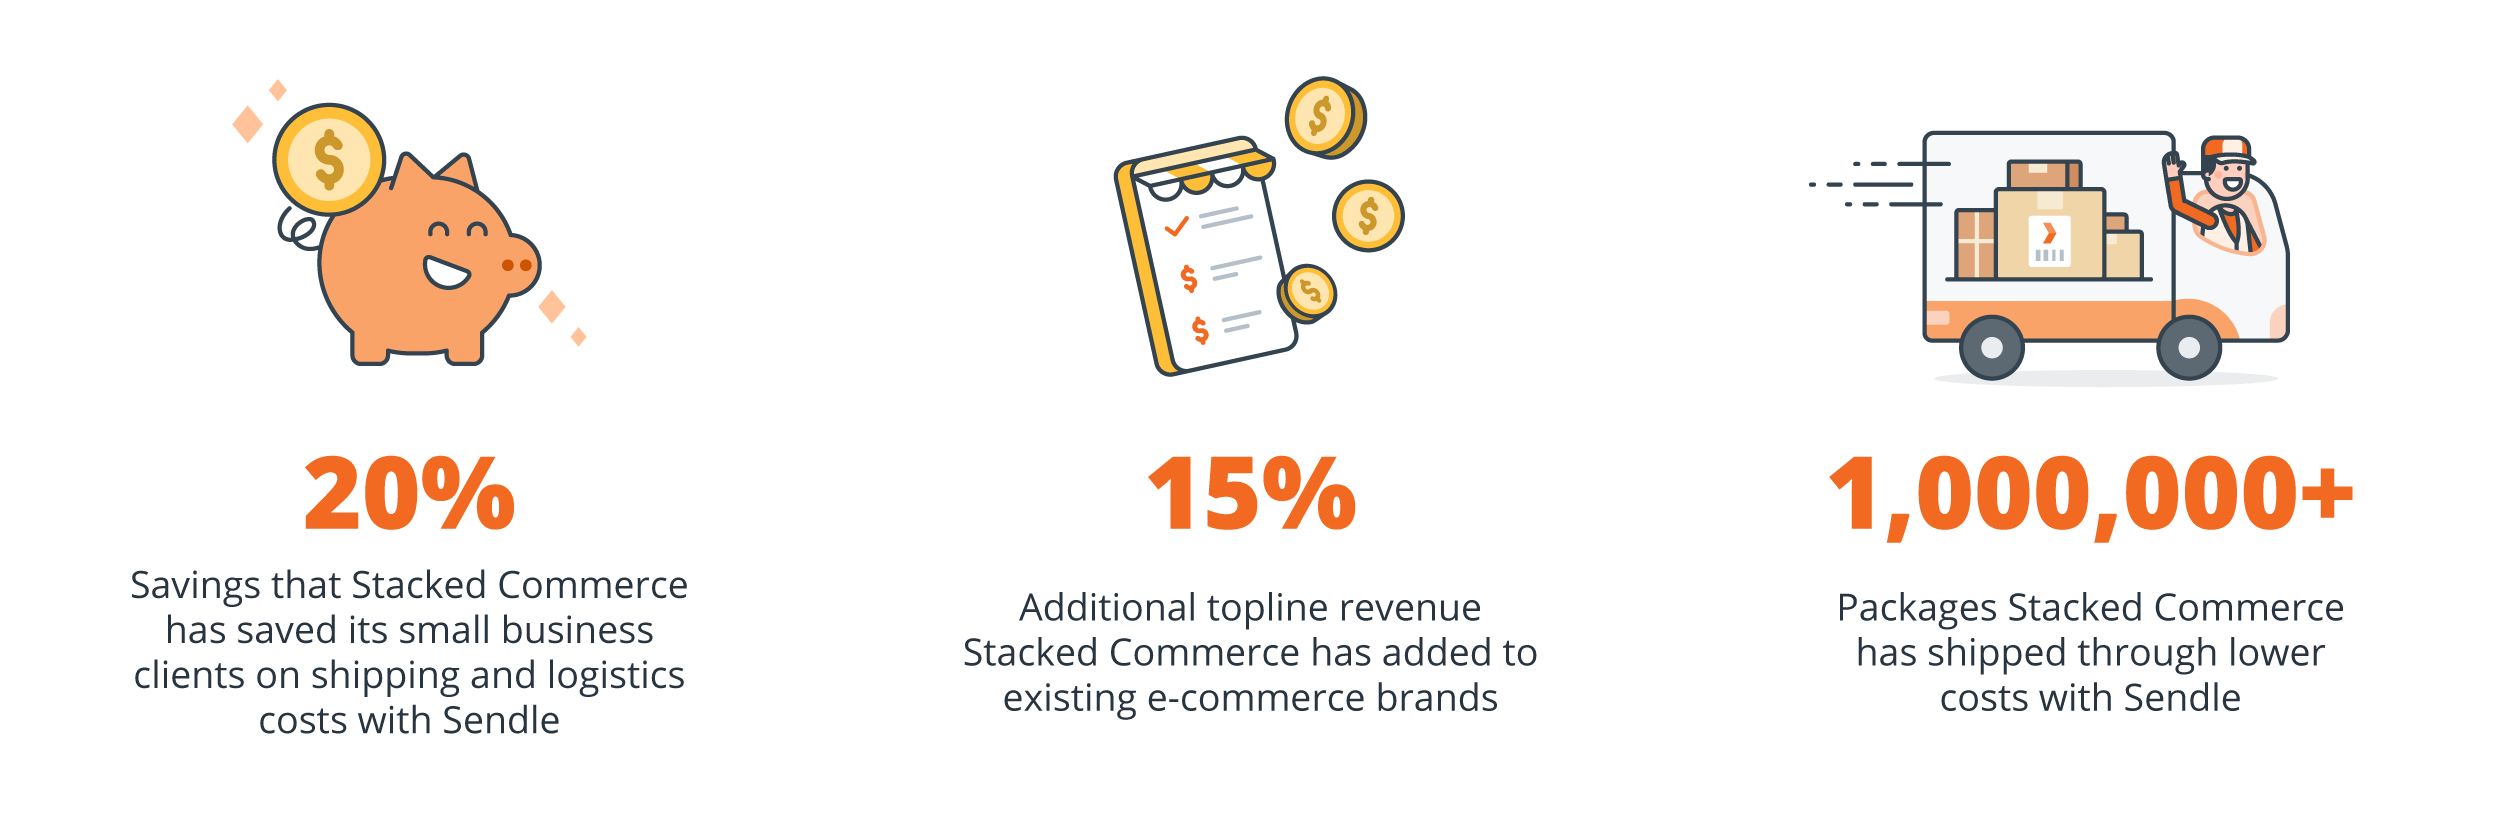 sendle stack commerce statistics chart with illustrations